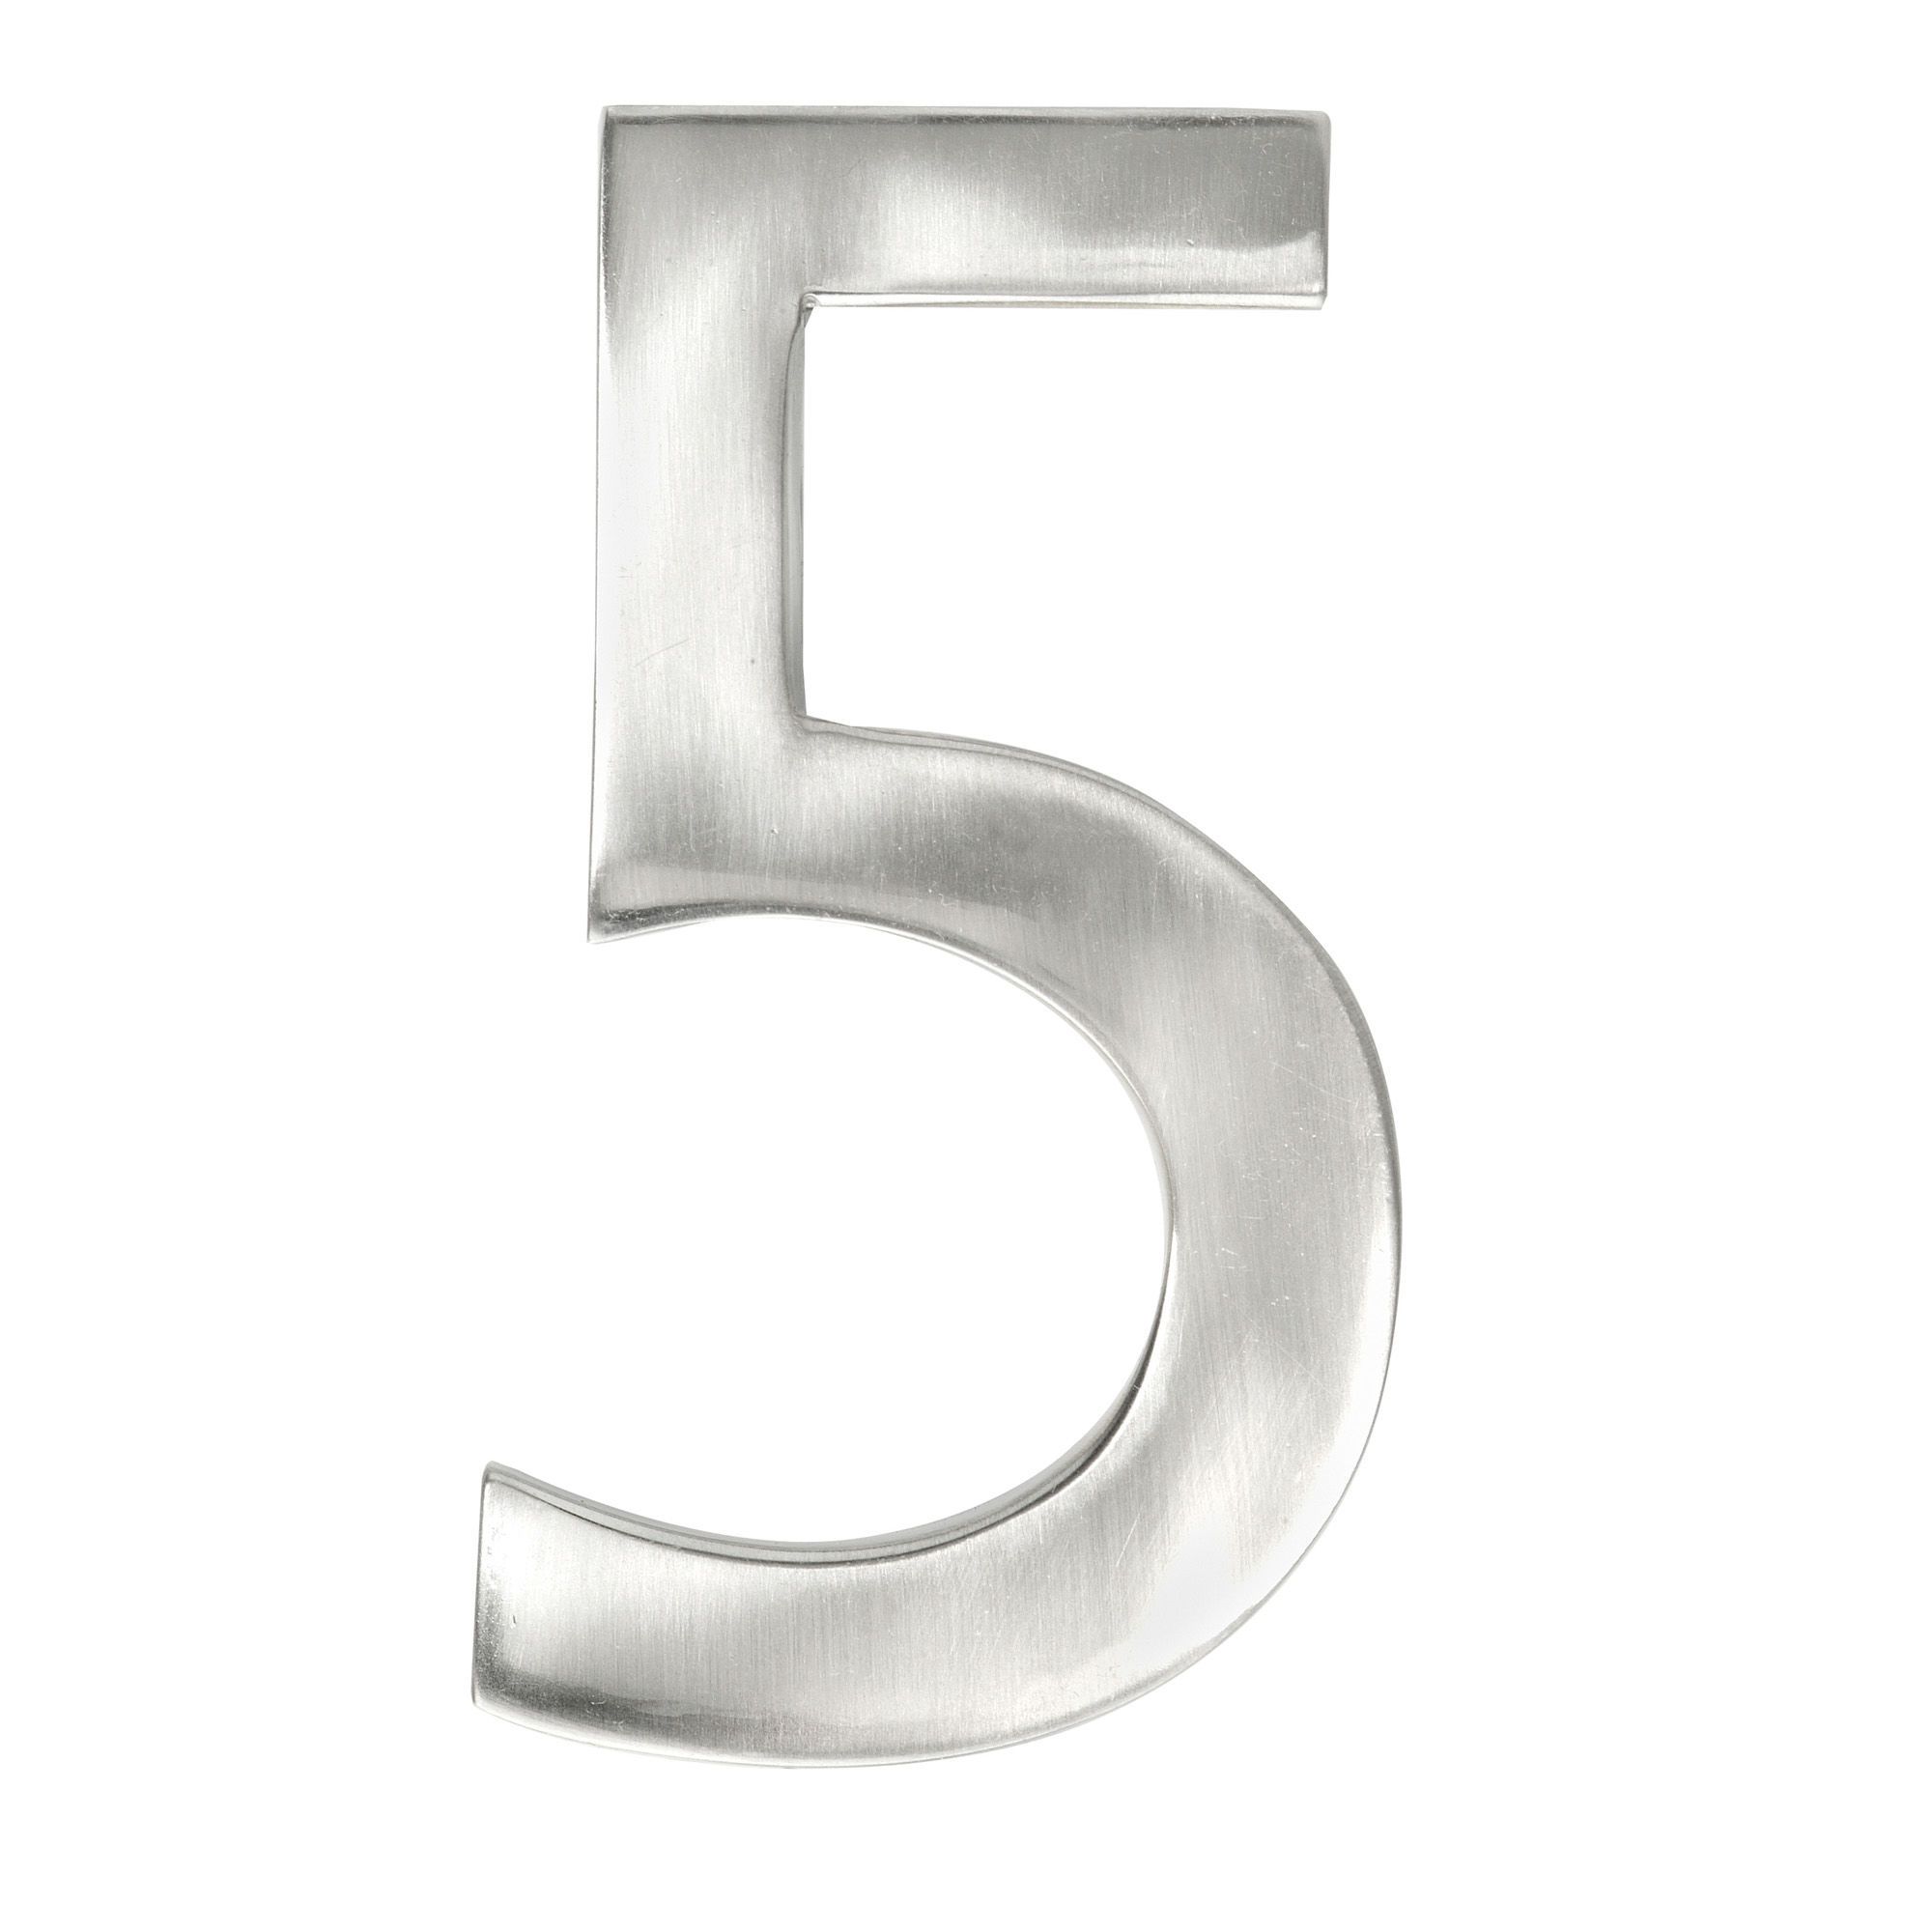 Modern style house number #5 - Satin nickel - 1/4